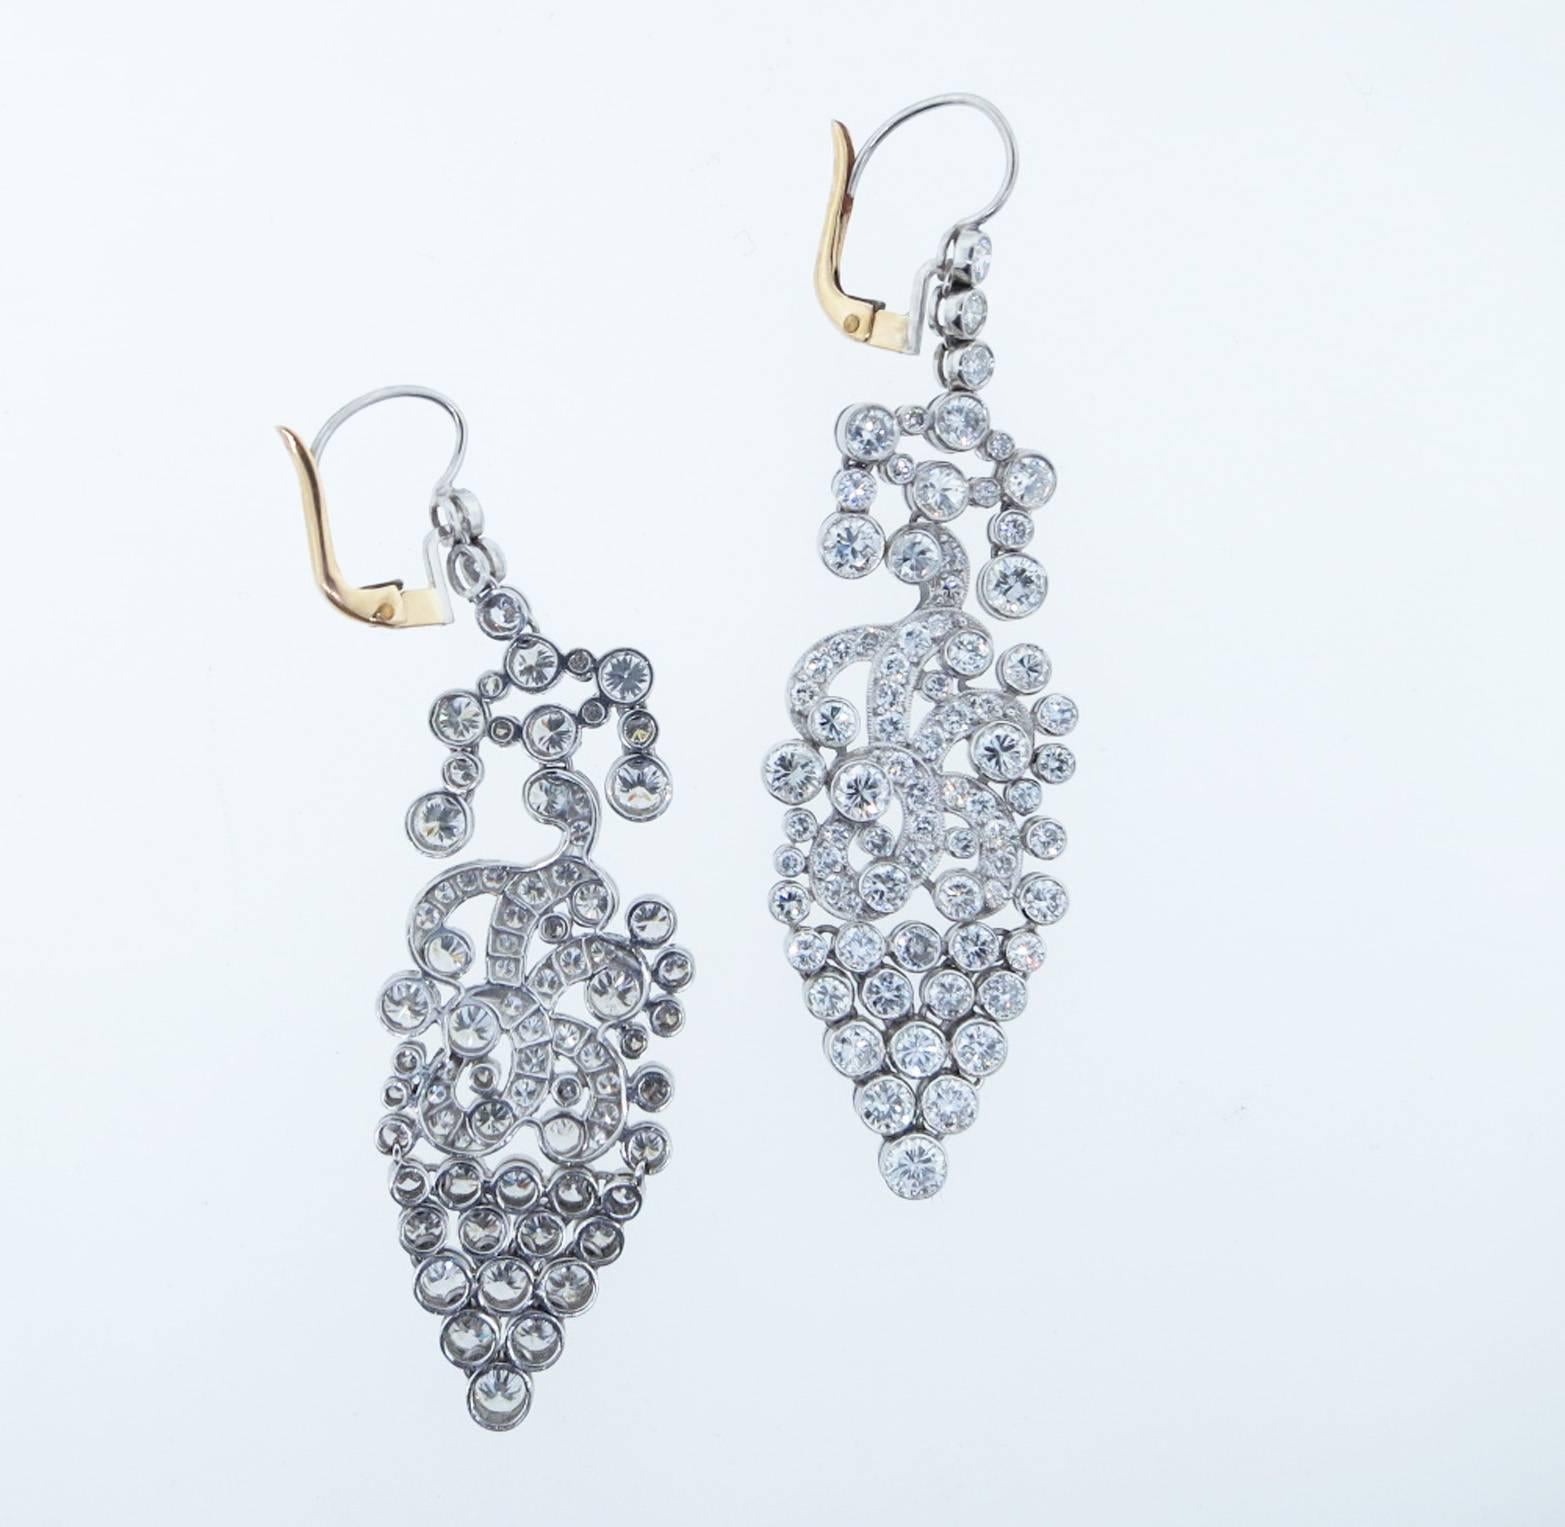 Sensational handmade drippy diamond chandelier earrings. Each lever back earring is bezel and bead set in fluid articulated platinum mounts with 75 matching round brilliant cut diamonds totaling approx 7.0cts. The earrings measure 2.5 inches in